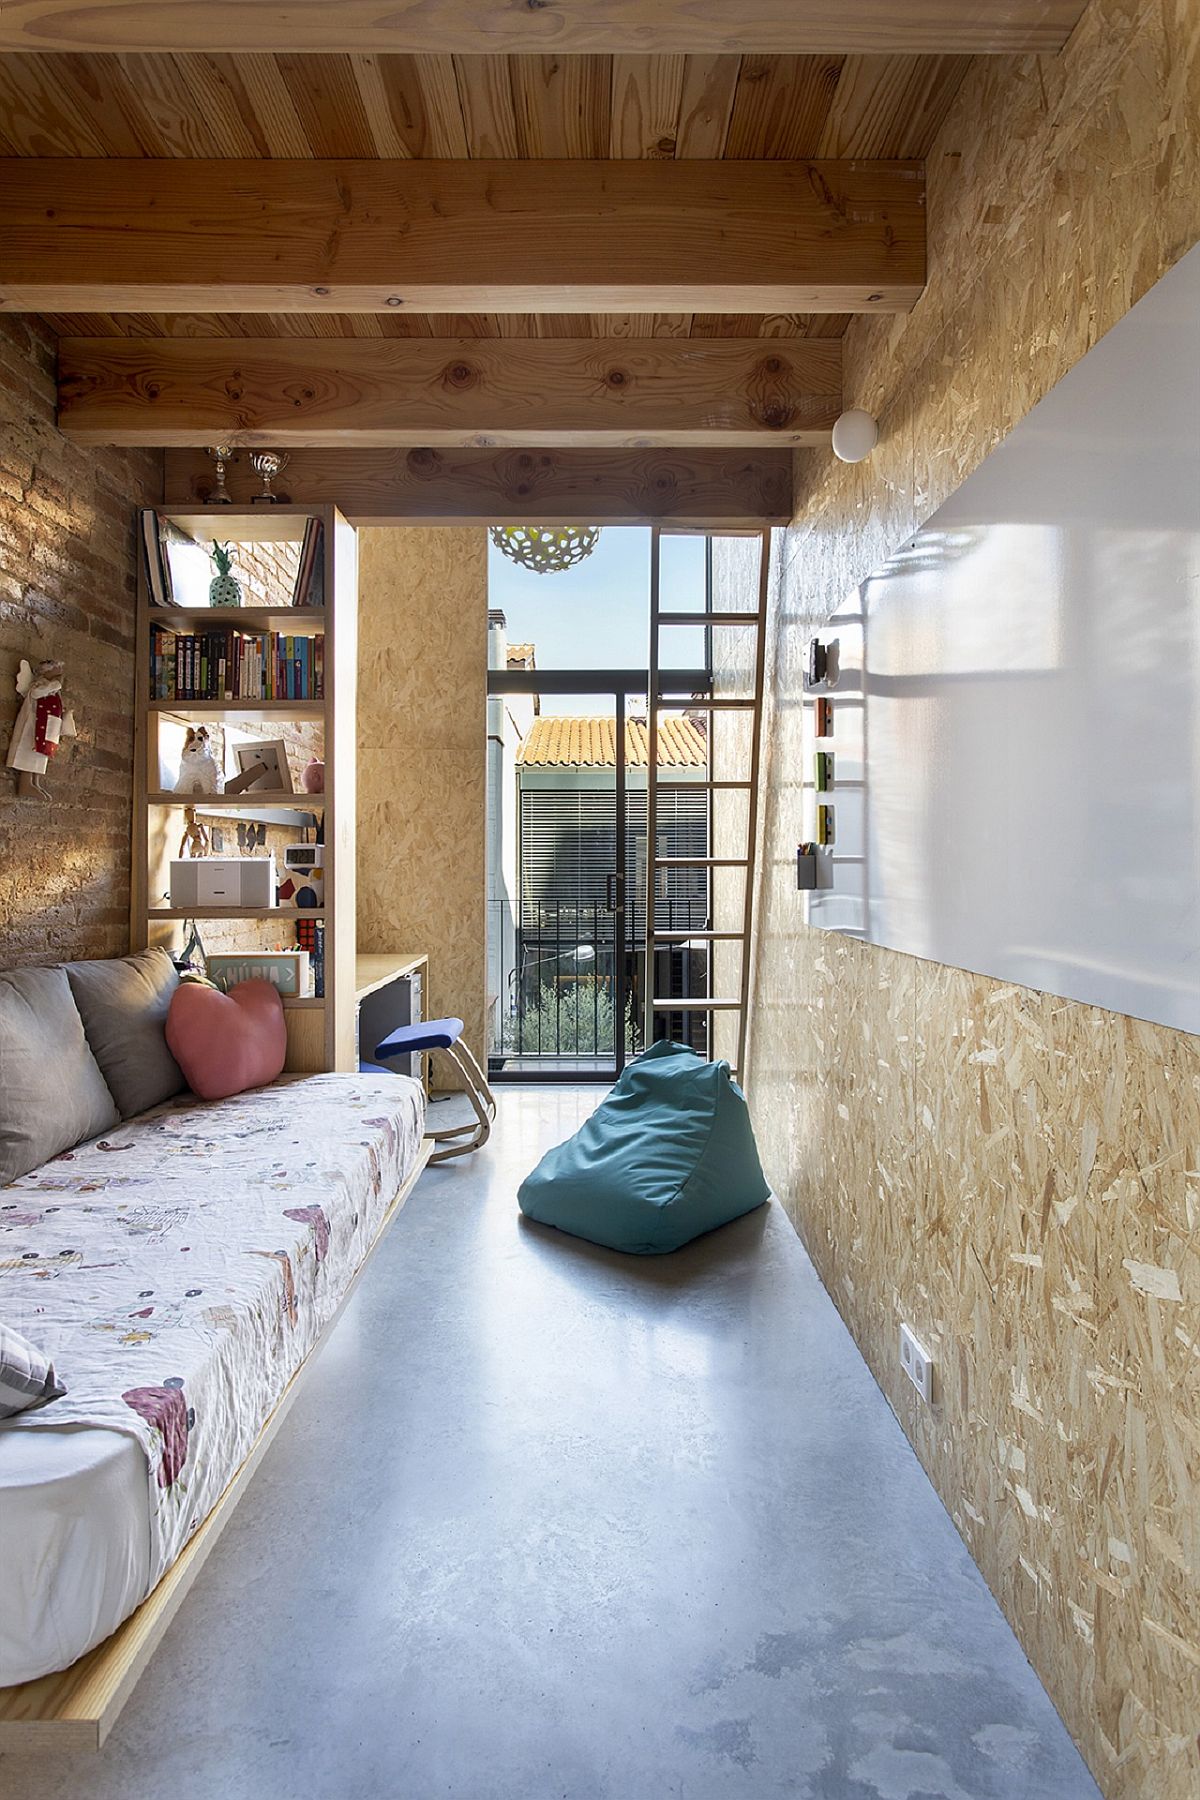 Cork-covered walls give the home a quirky surface that is as beautiful as brick and wood walls